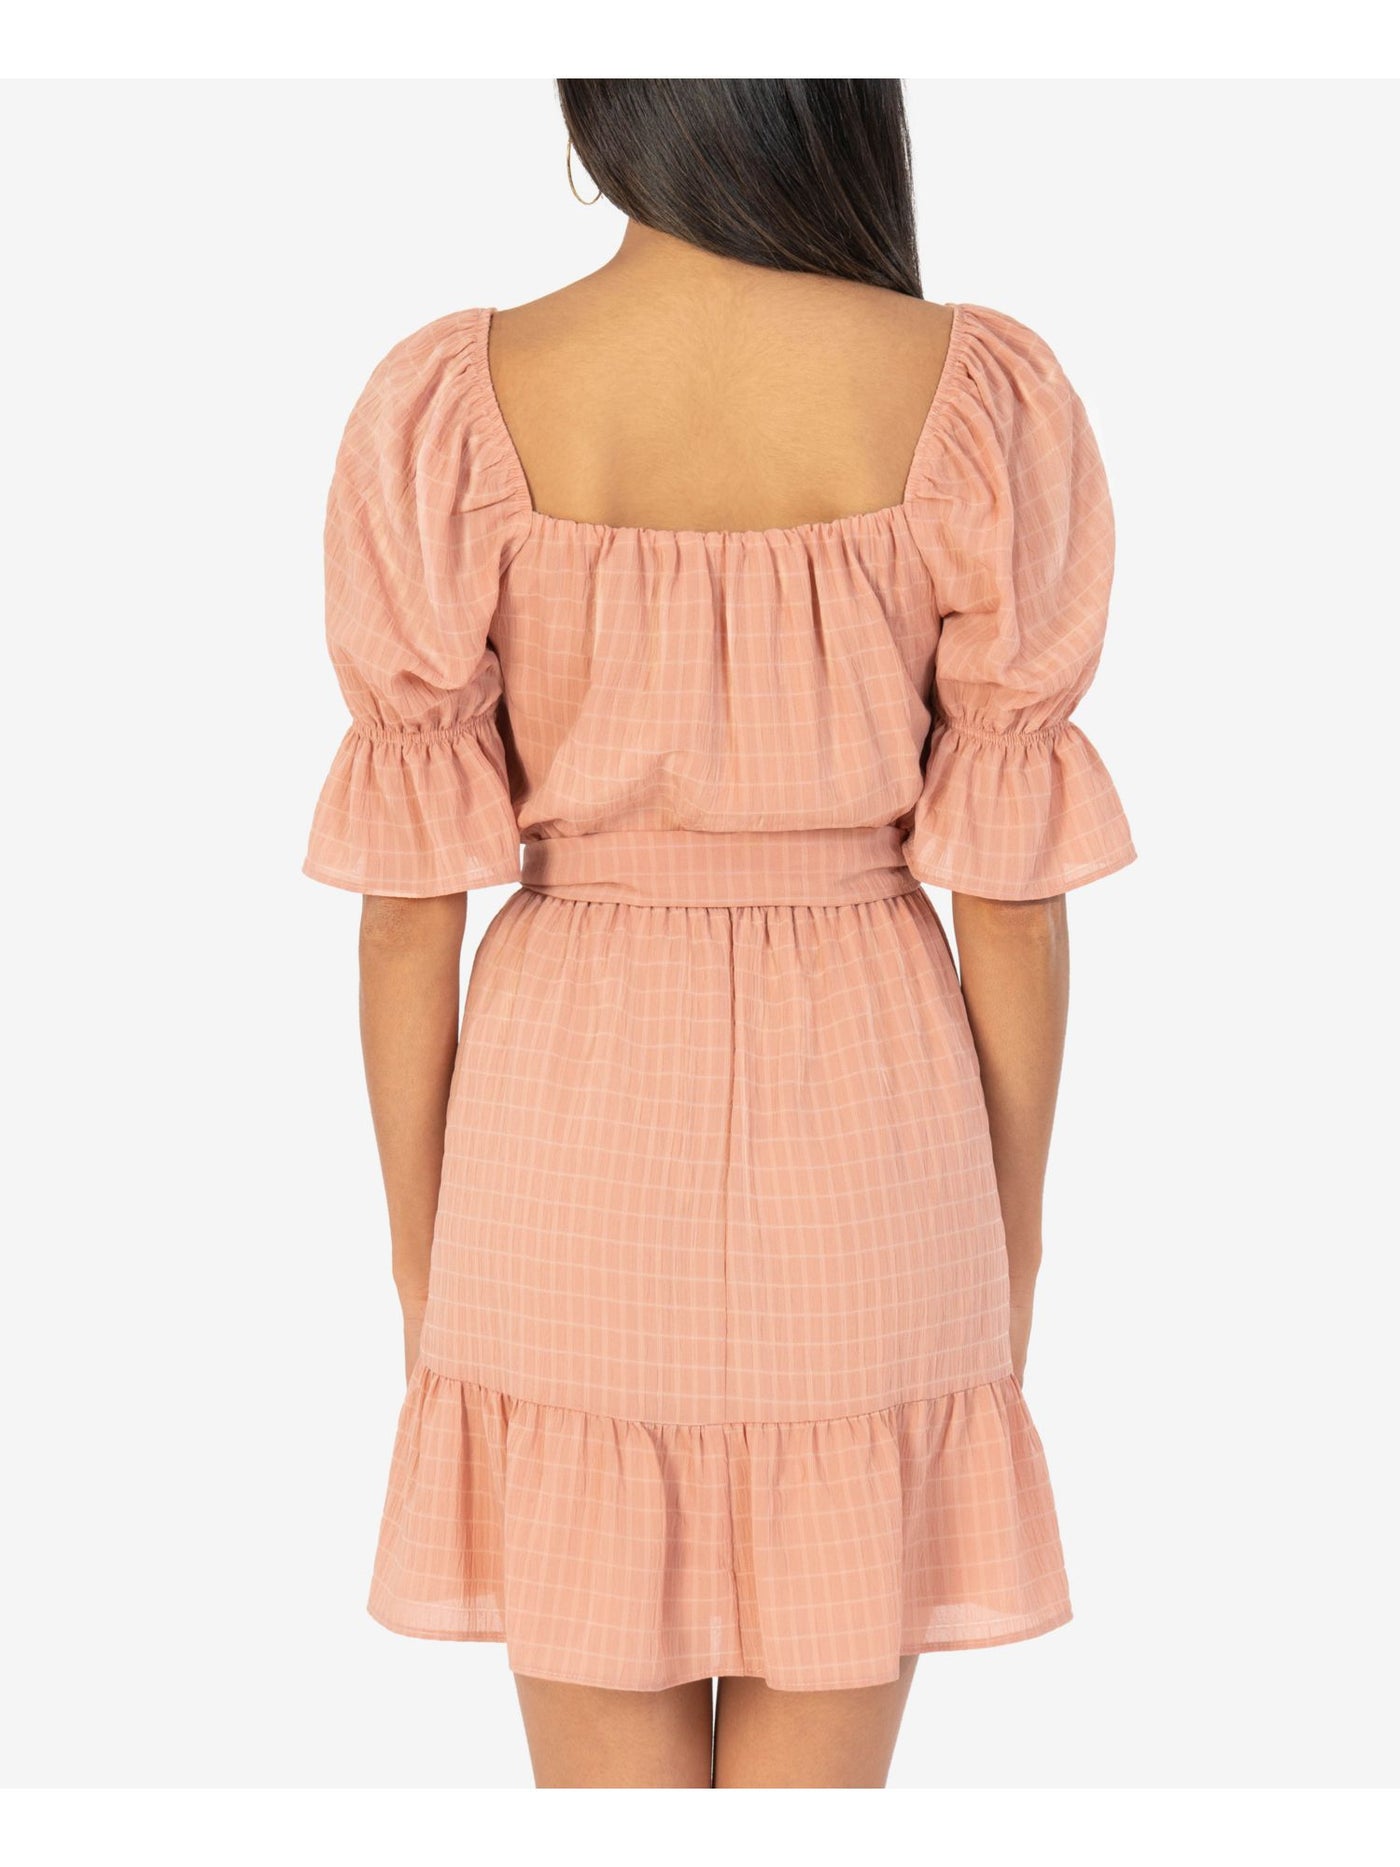 SPEECHLESS Womens Pink Stretch Ruffled Belted Semi-sheer Lined Pouf Sleeve Square Neck Mini Party Fit + Flare Dress Juniors XXS